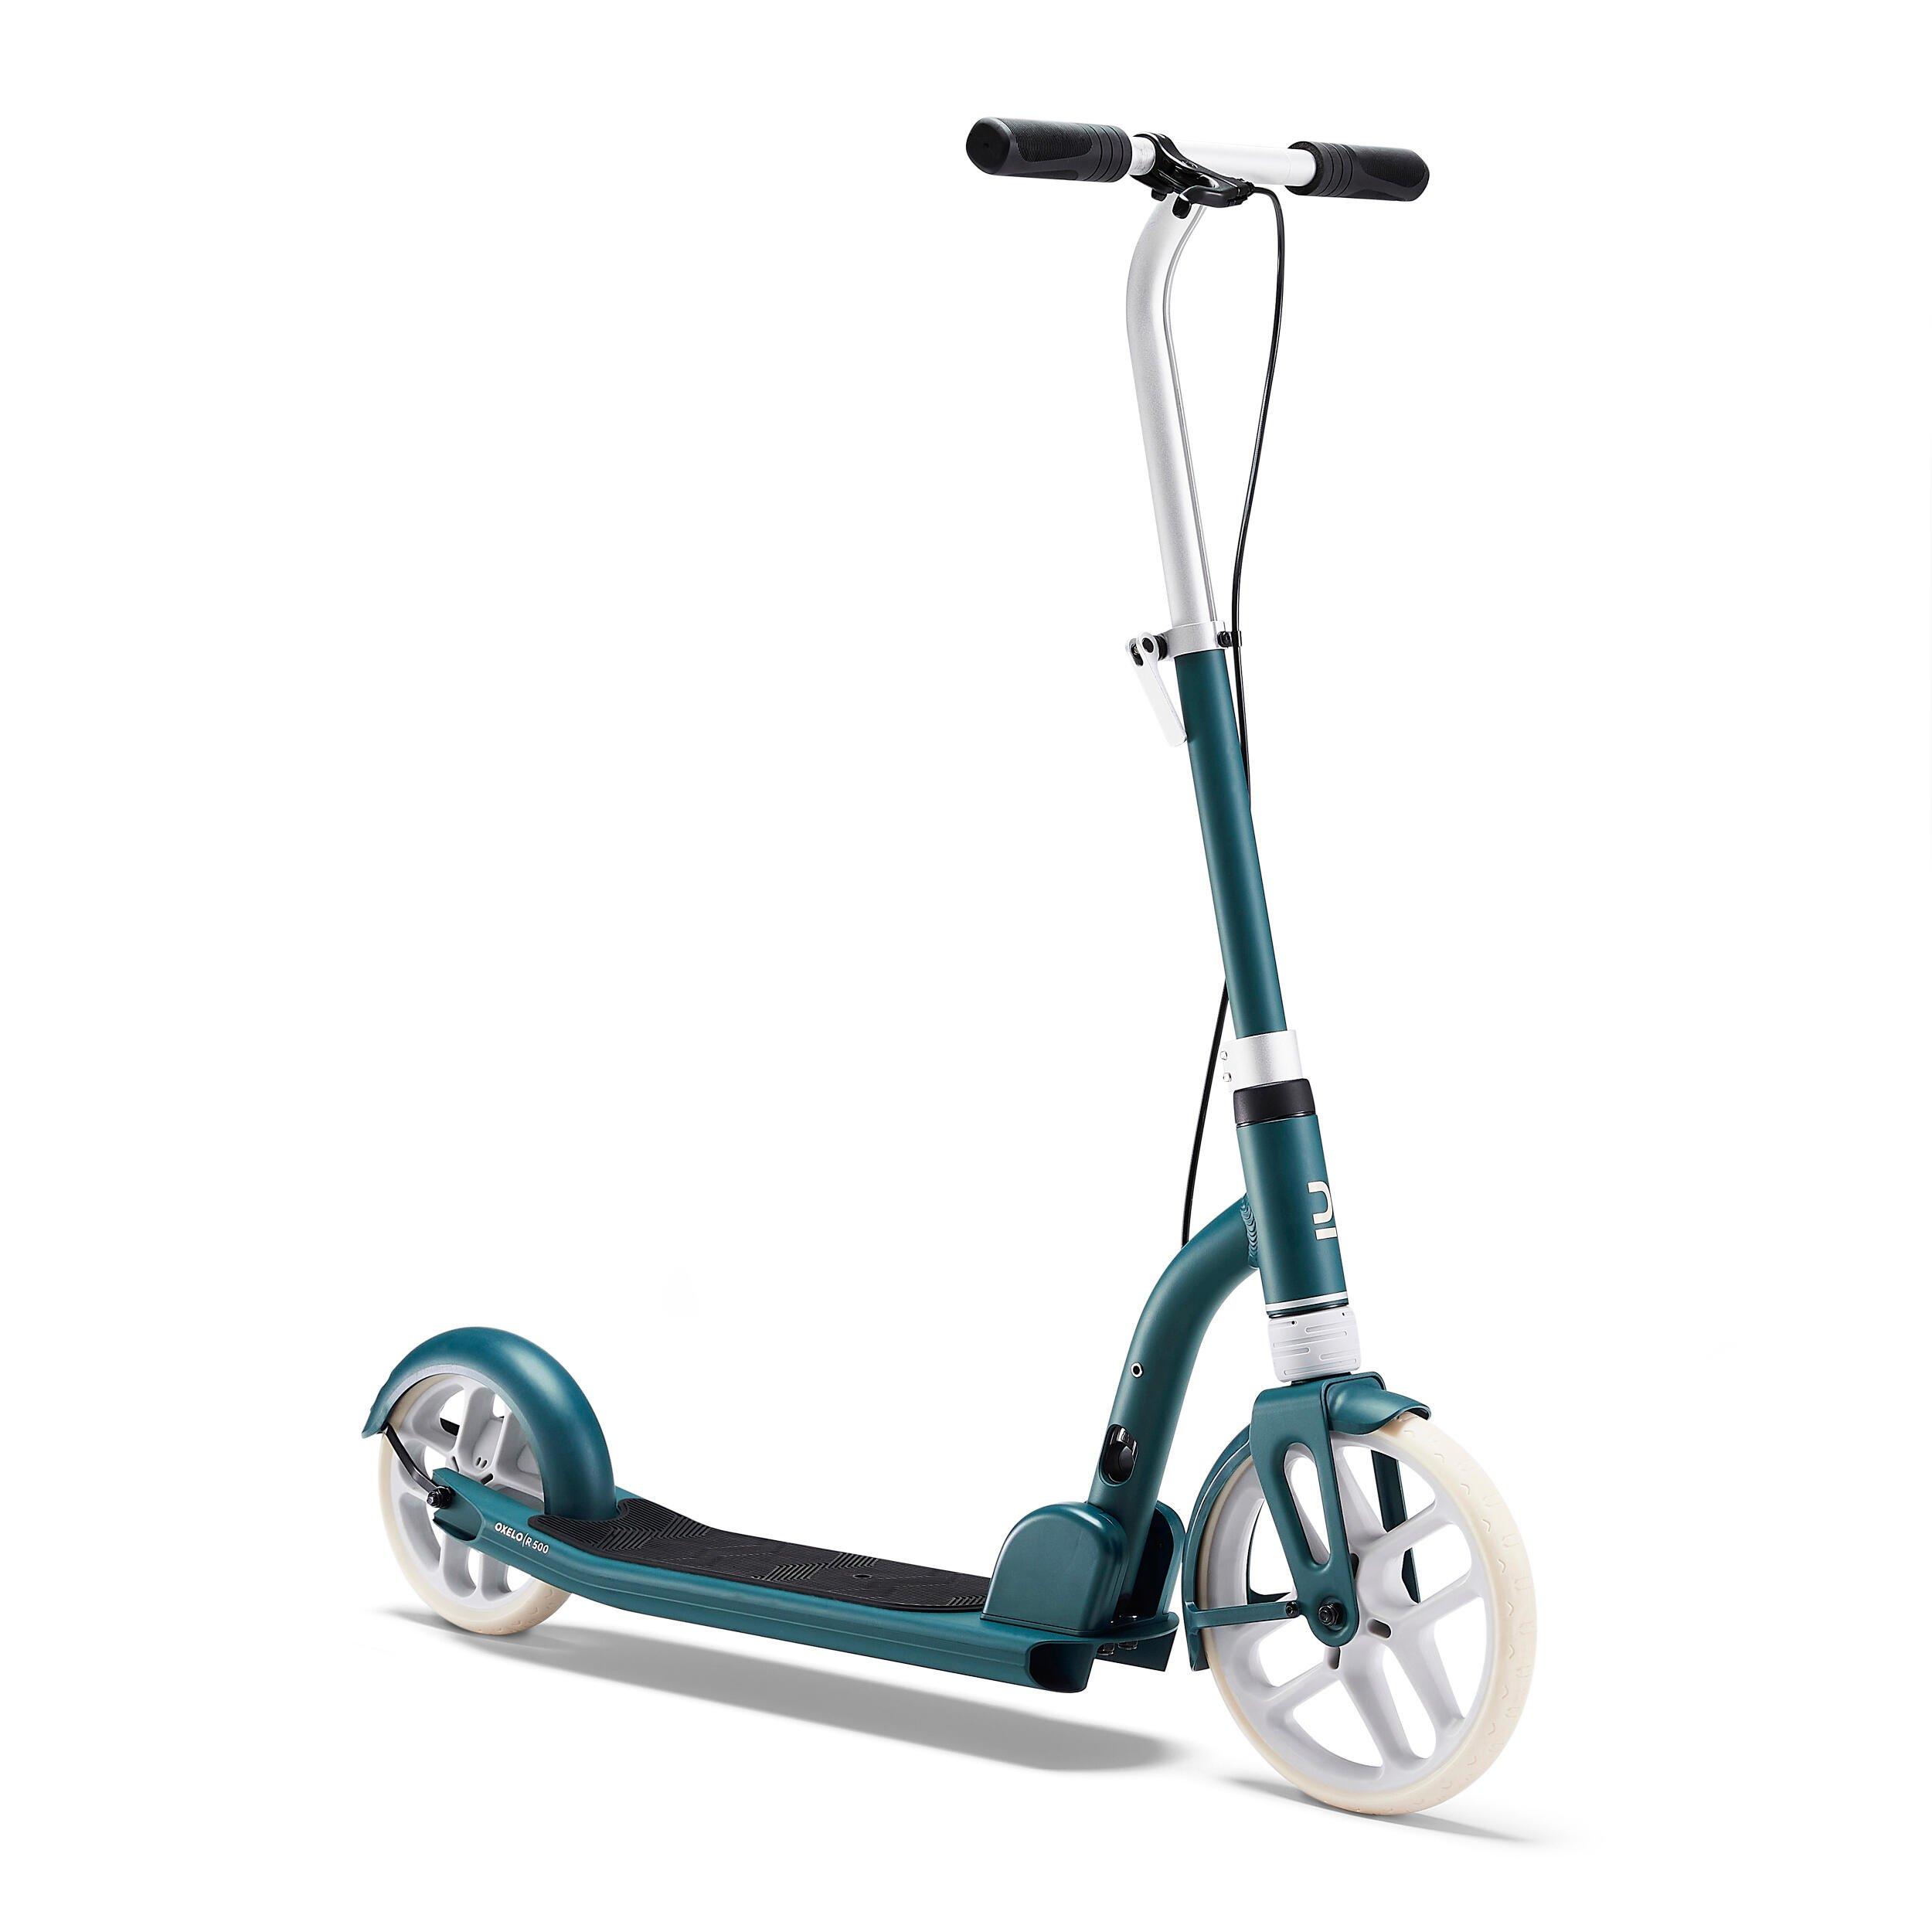 Decathlon Adult Scooter R500